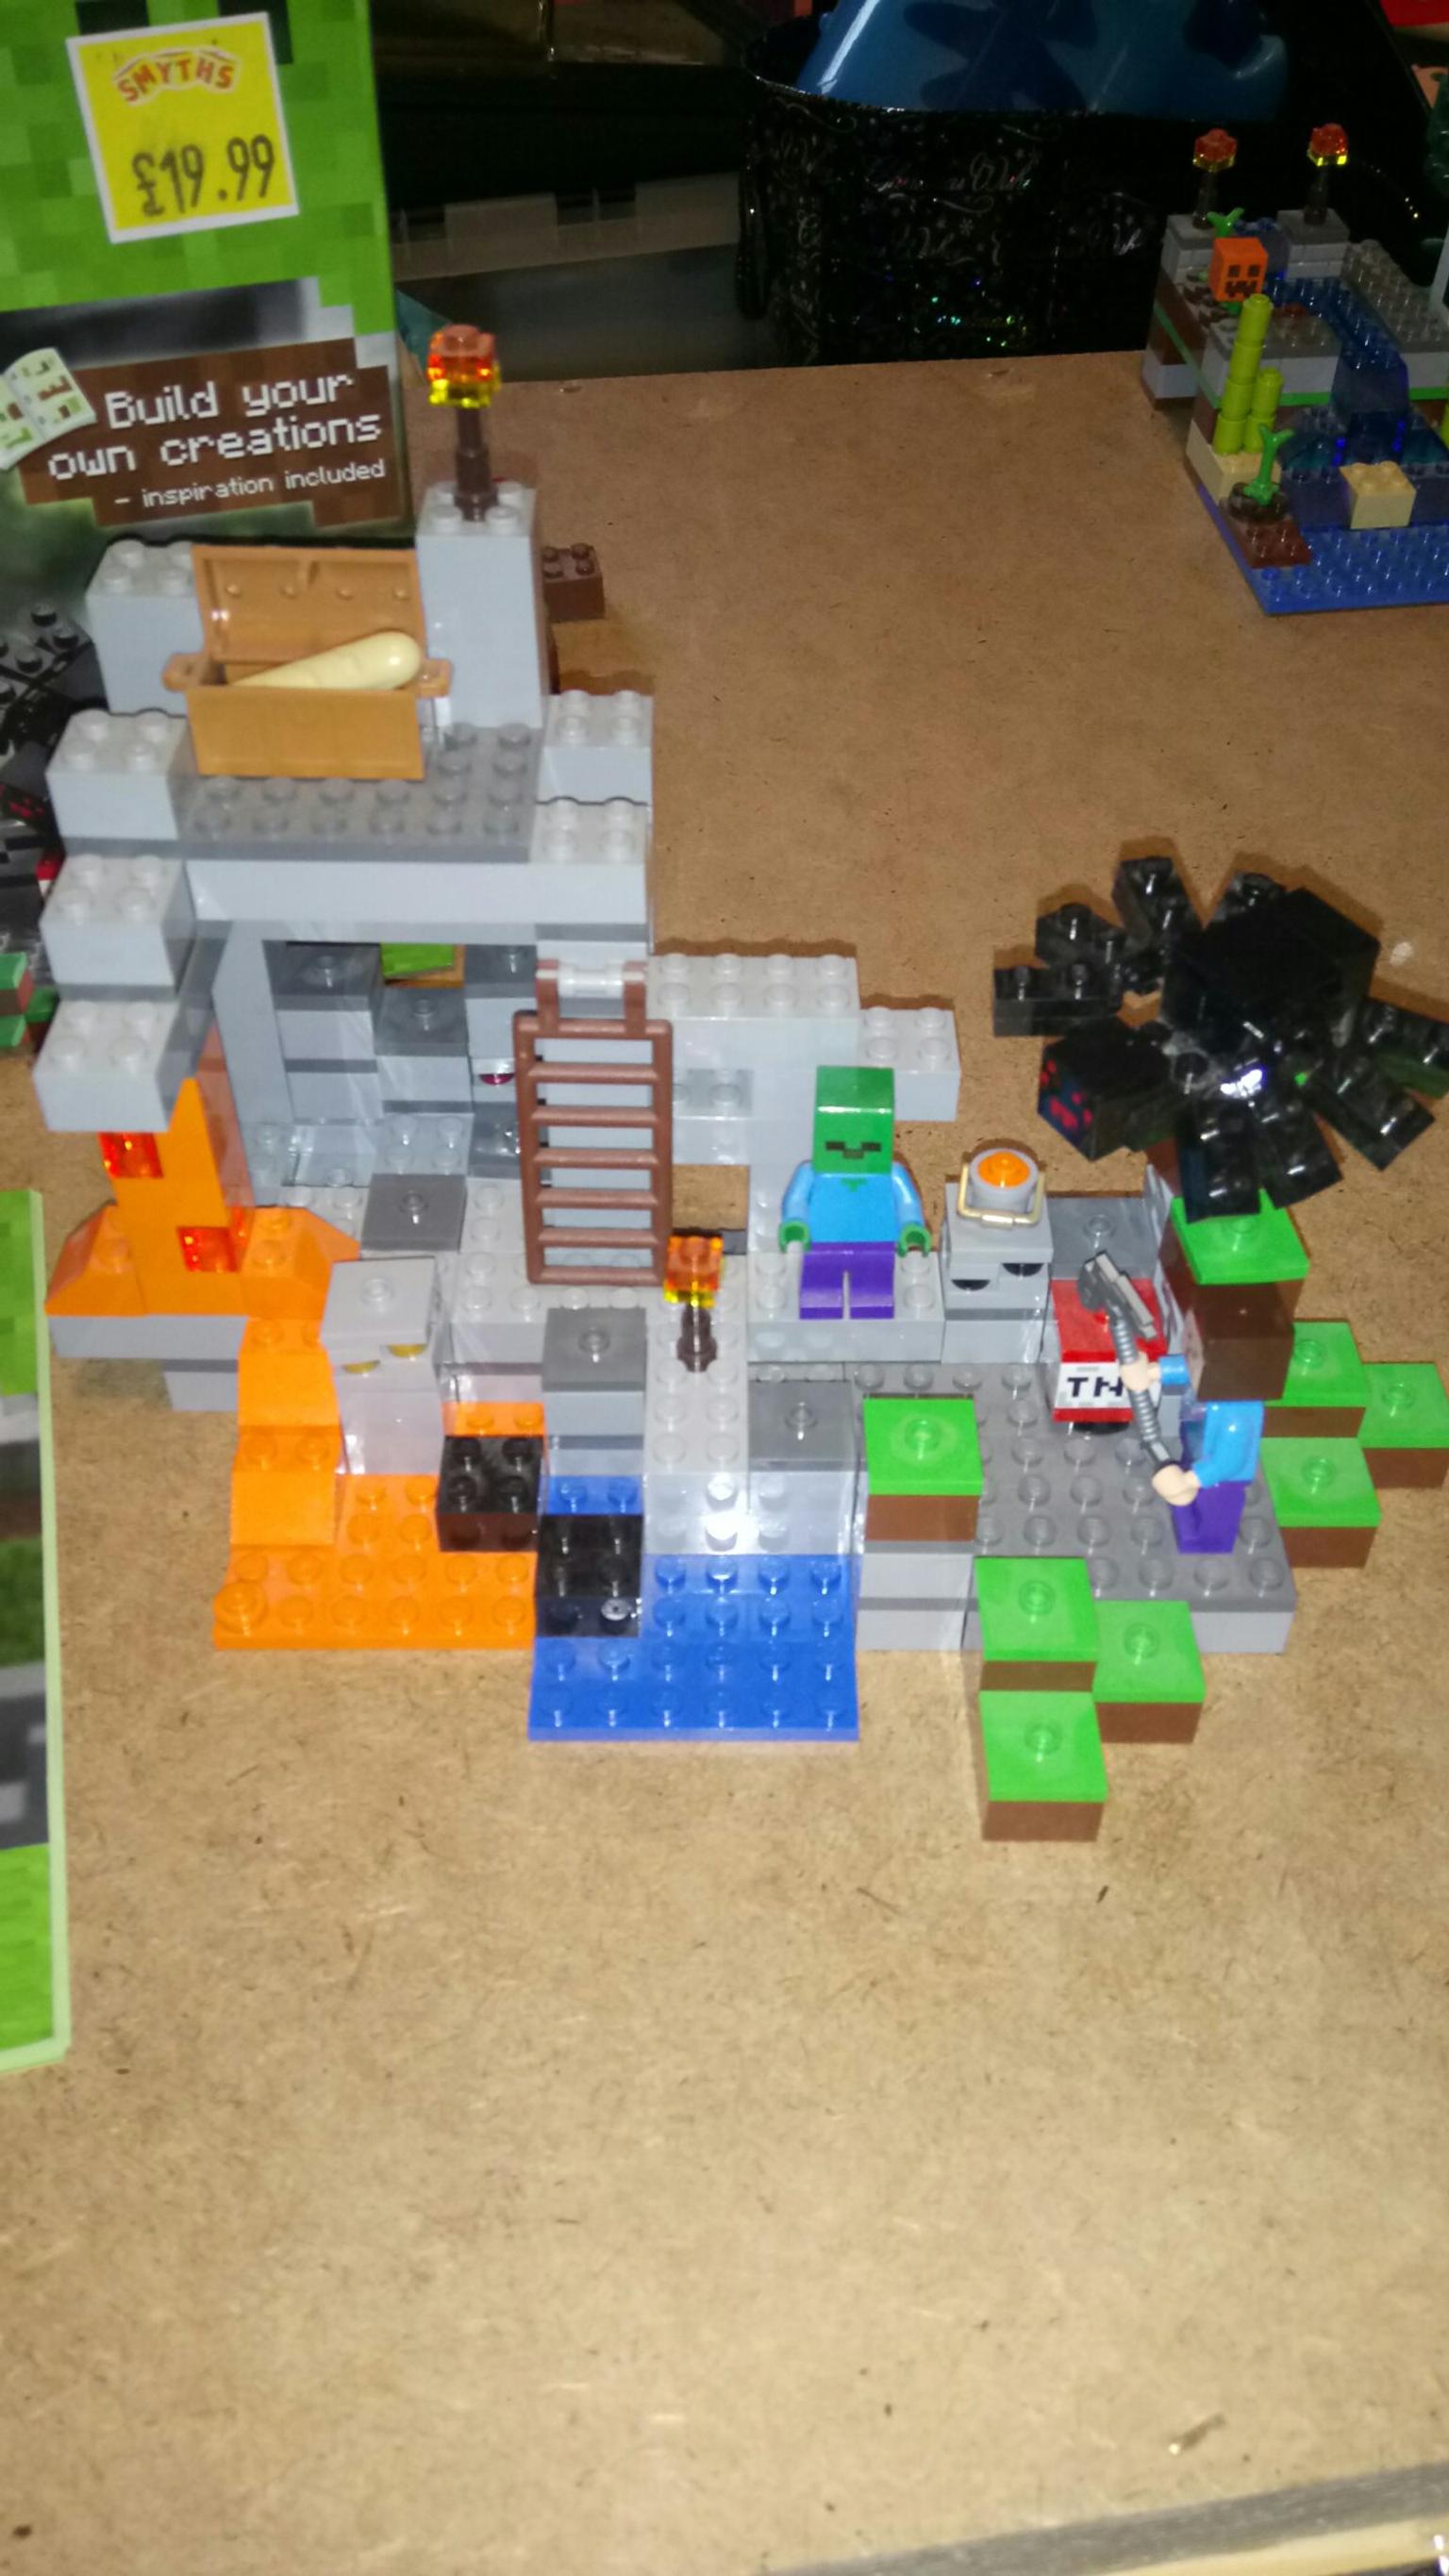 Minecraft Lego 21113 The Mine In Madeley For 20 00 For Sale Shpock